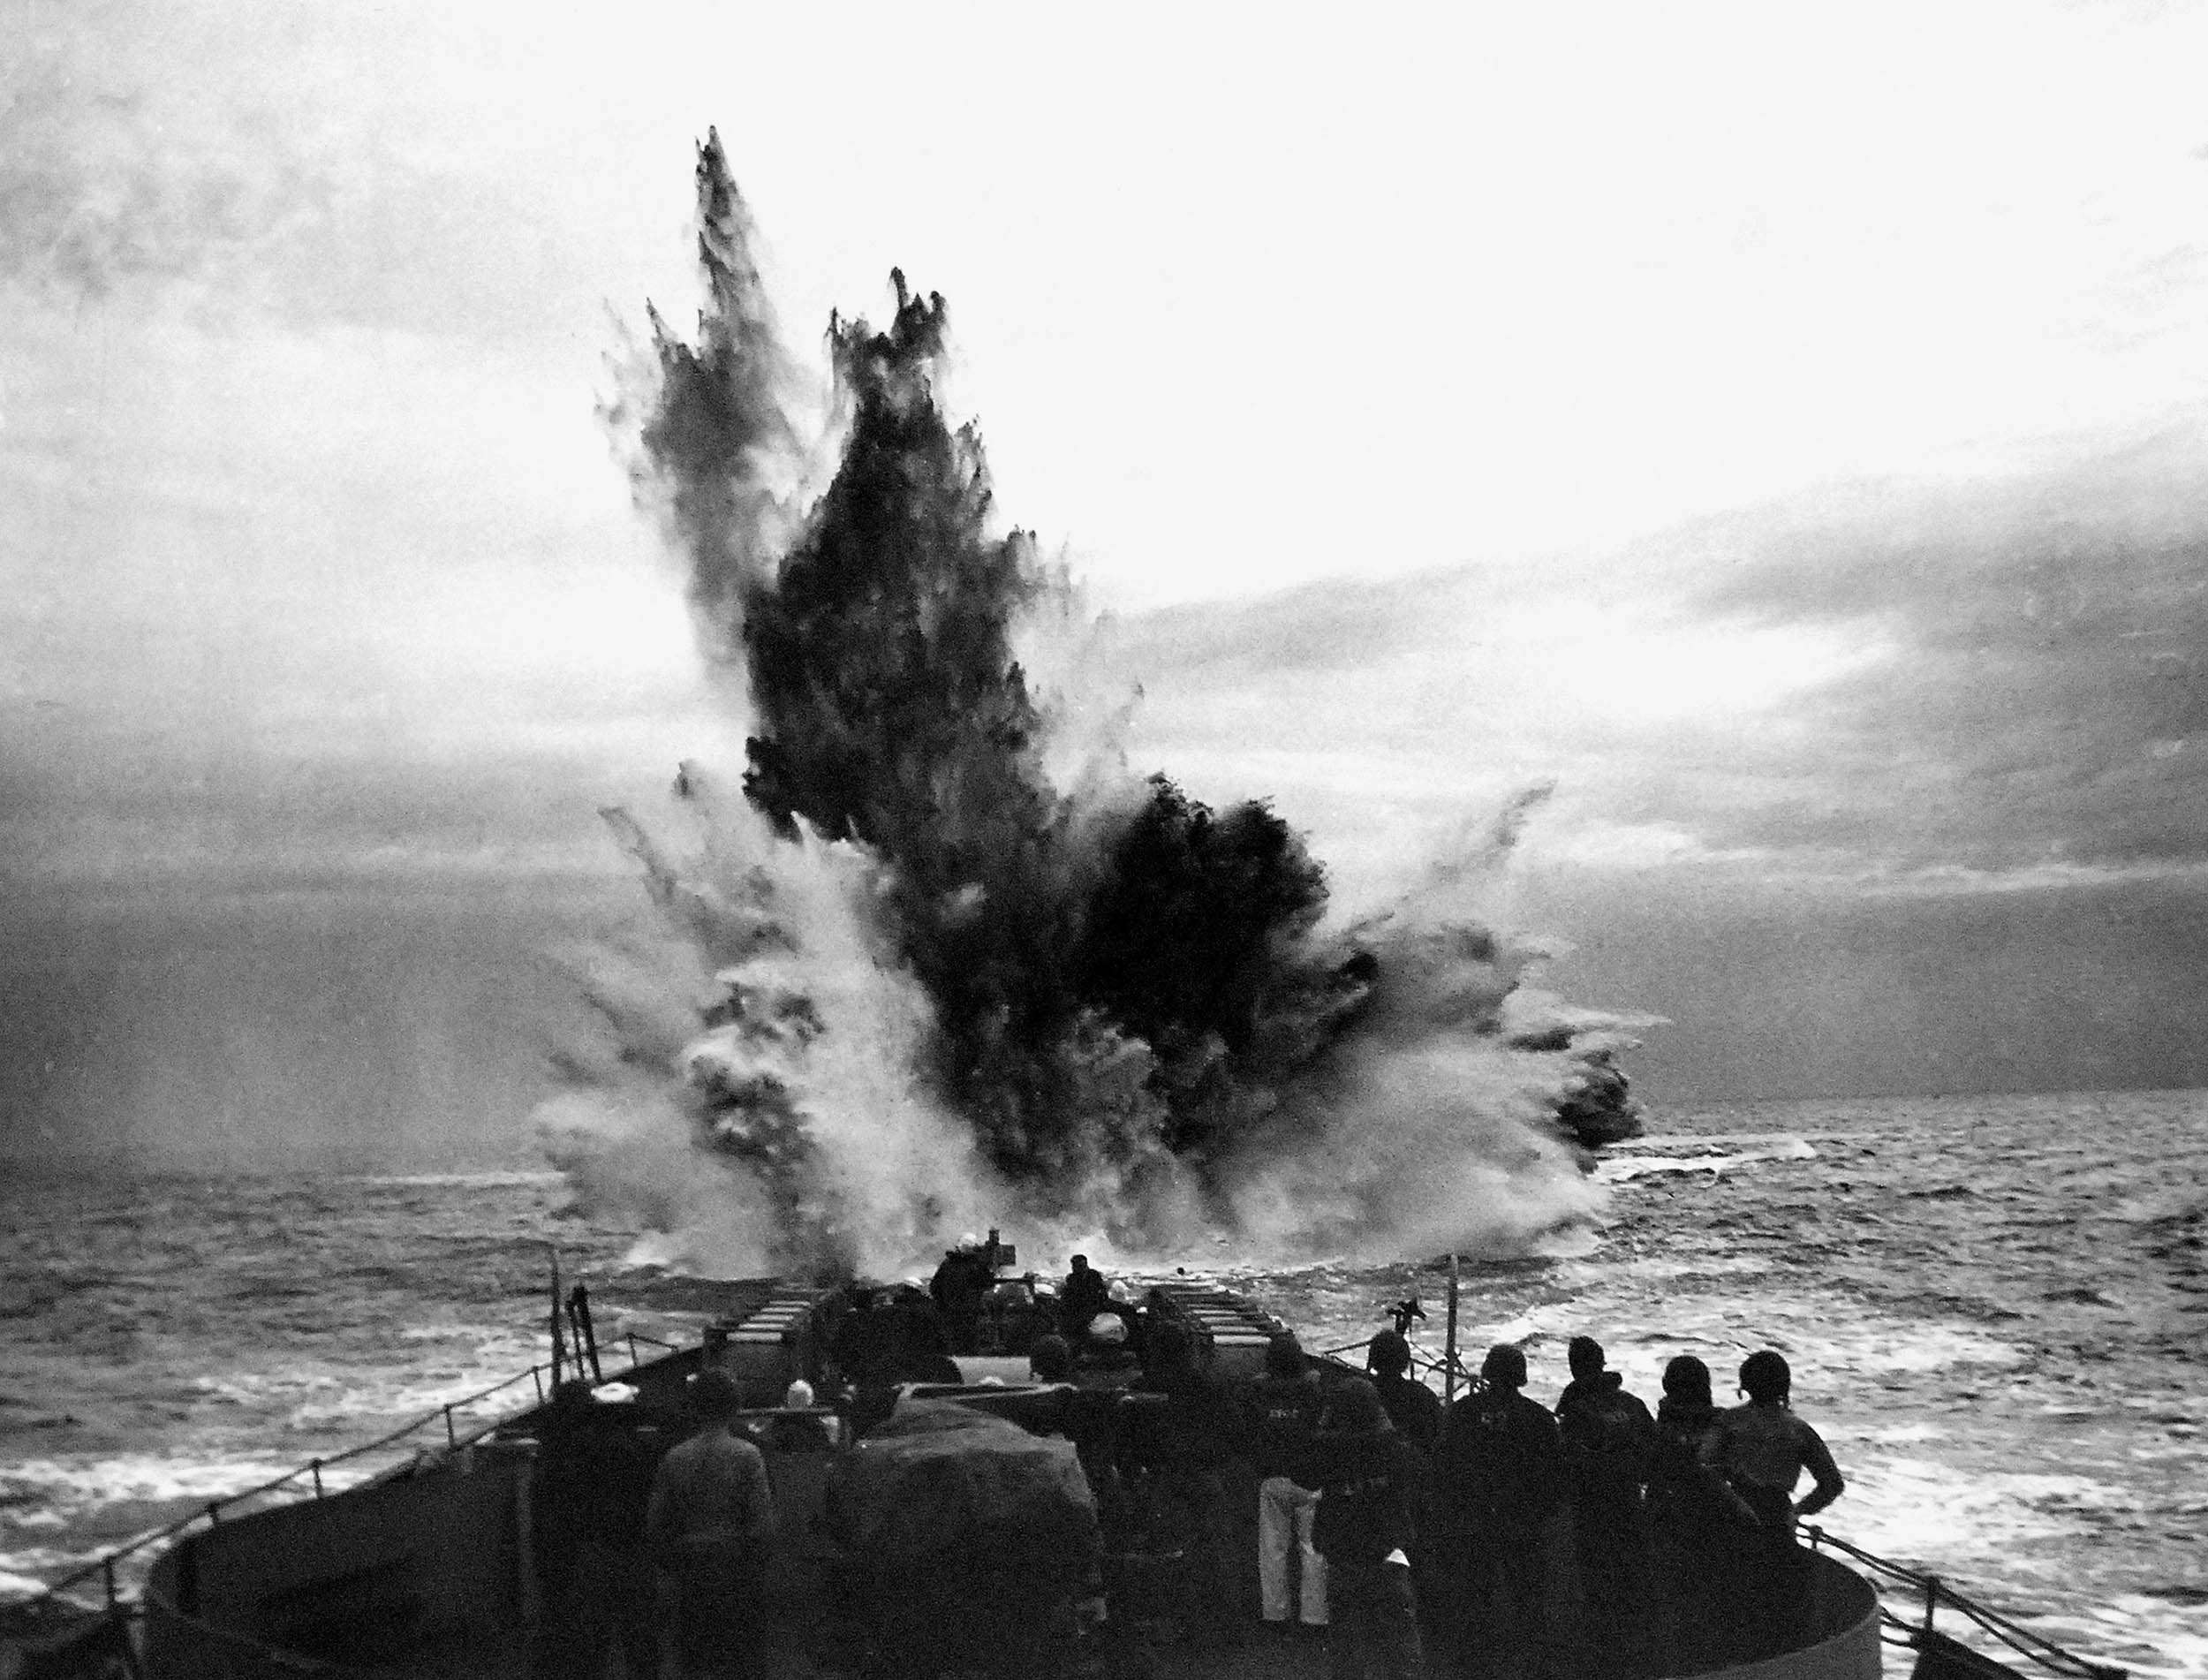 Coastguardsmen watch for possible depth charge explosion results during convoy patrol in Atlantic Ocean during World War II (National
Museum of the U.S. Navy)